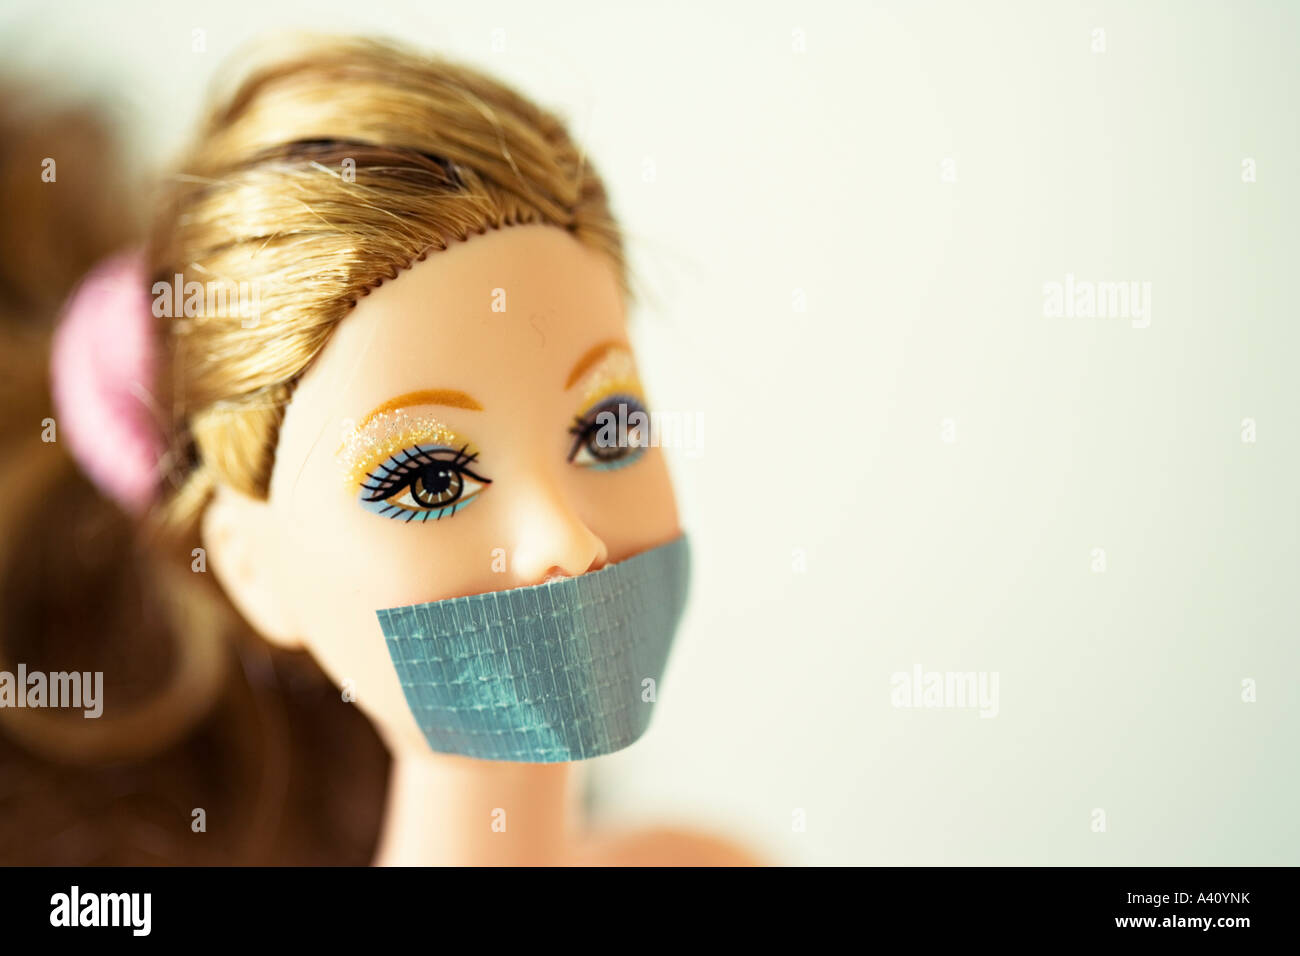 Barbie doll with Gaffa tape over mouth Stock Photo - Alamy